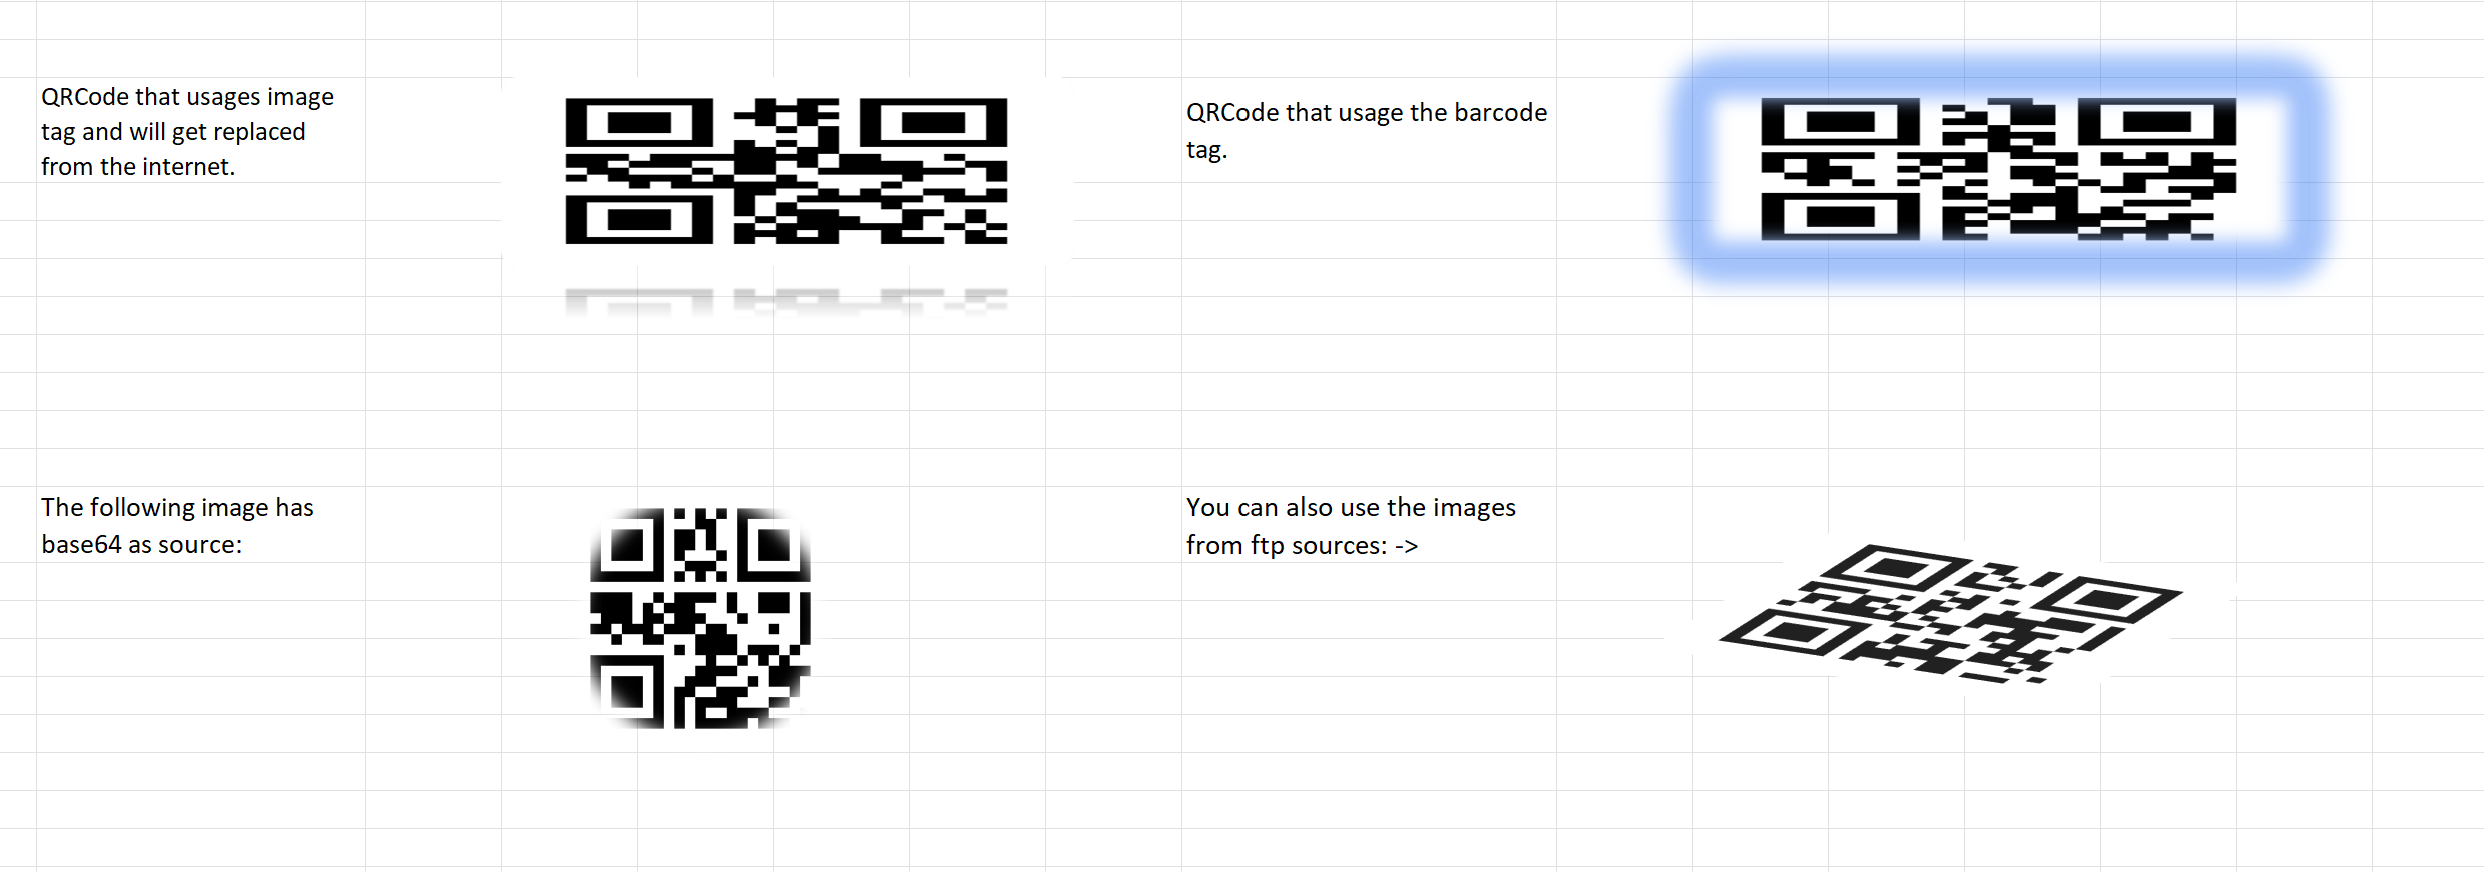 QRCODE image replacing